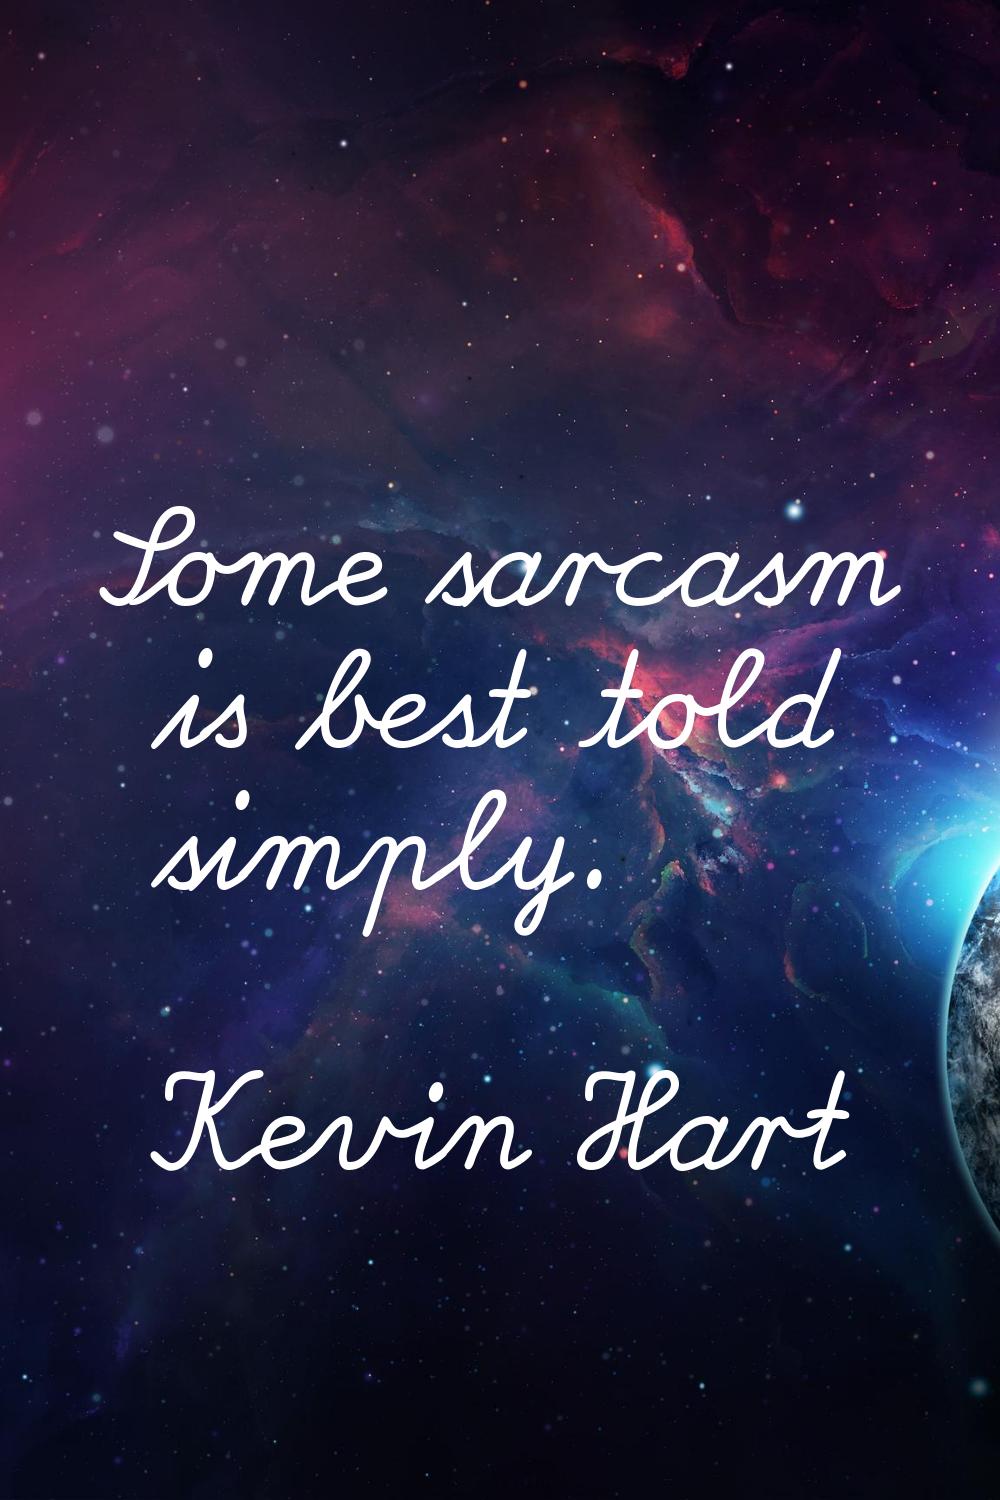 Some sarcasm is best told simply.